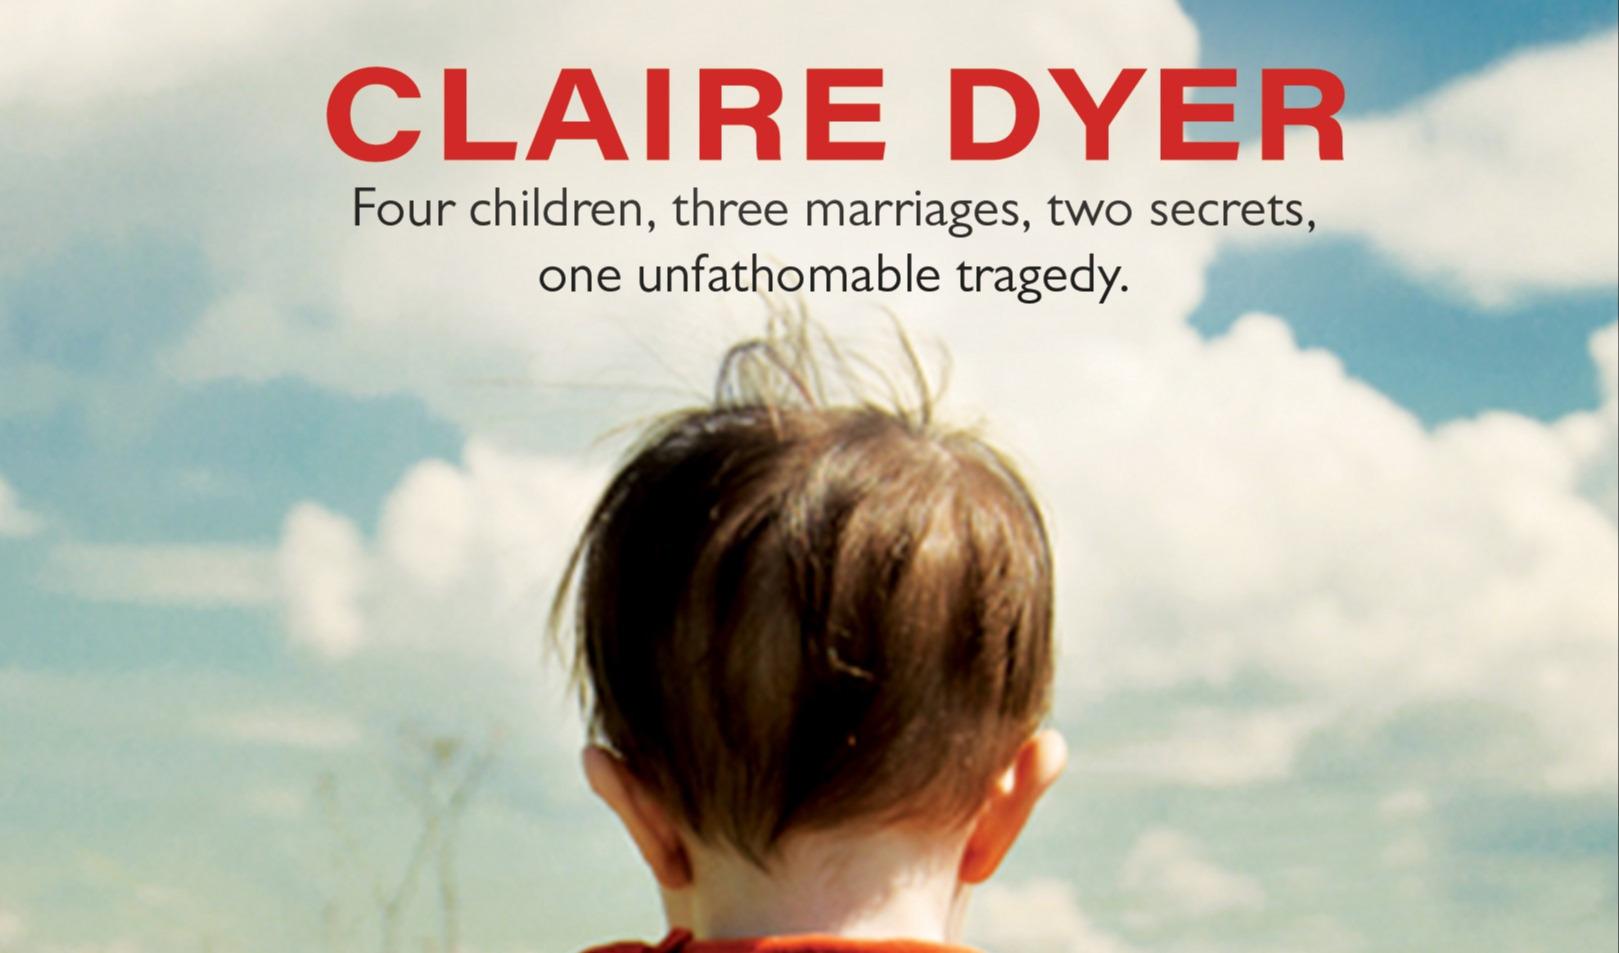 WHAT WE THOUGHT WE KNEW BY CLAIRE DYER